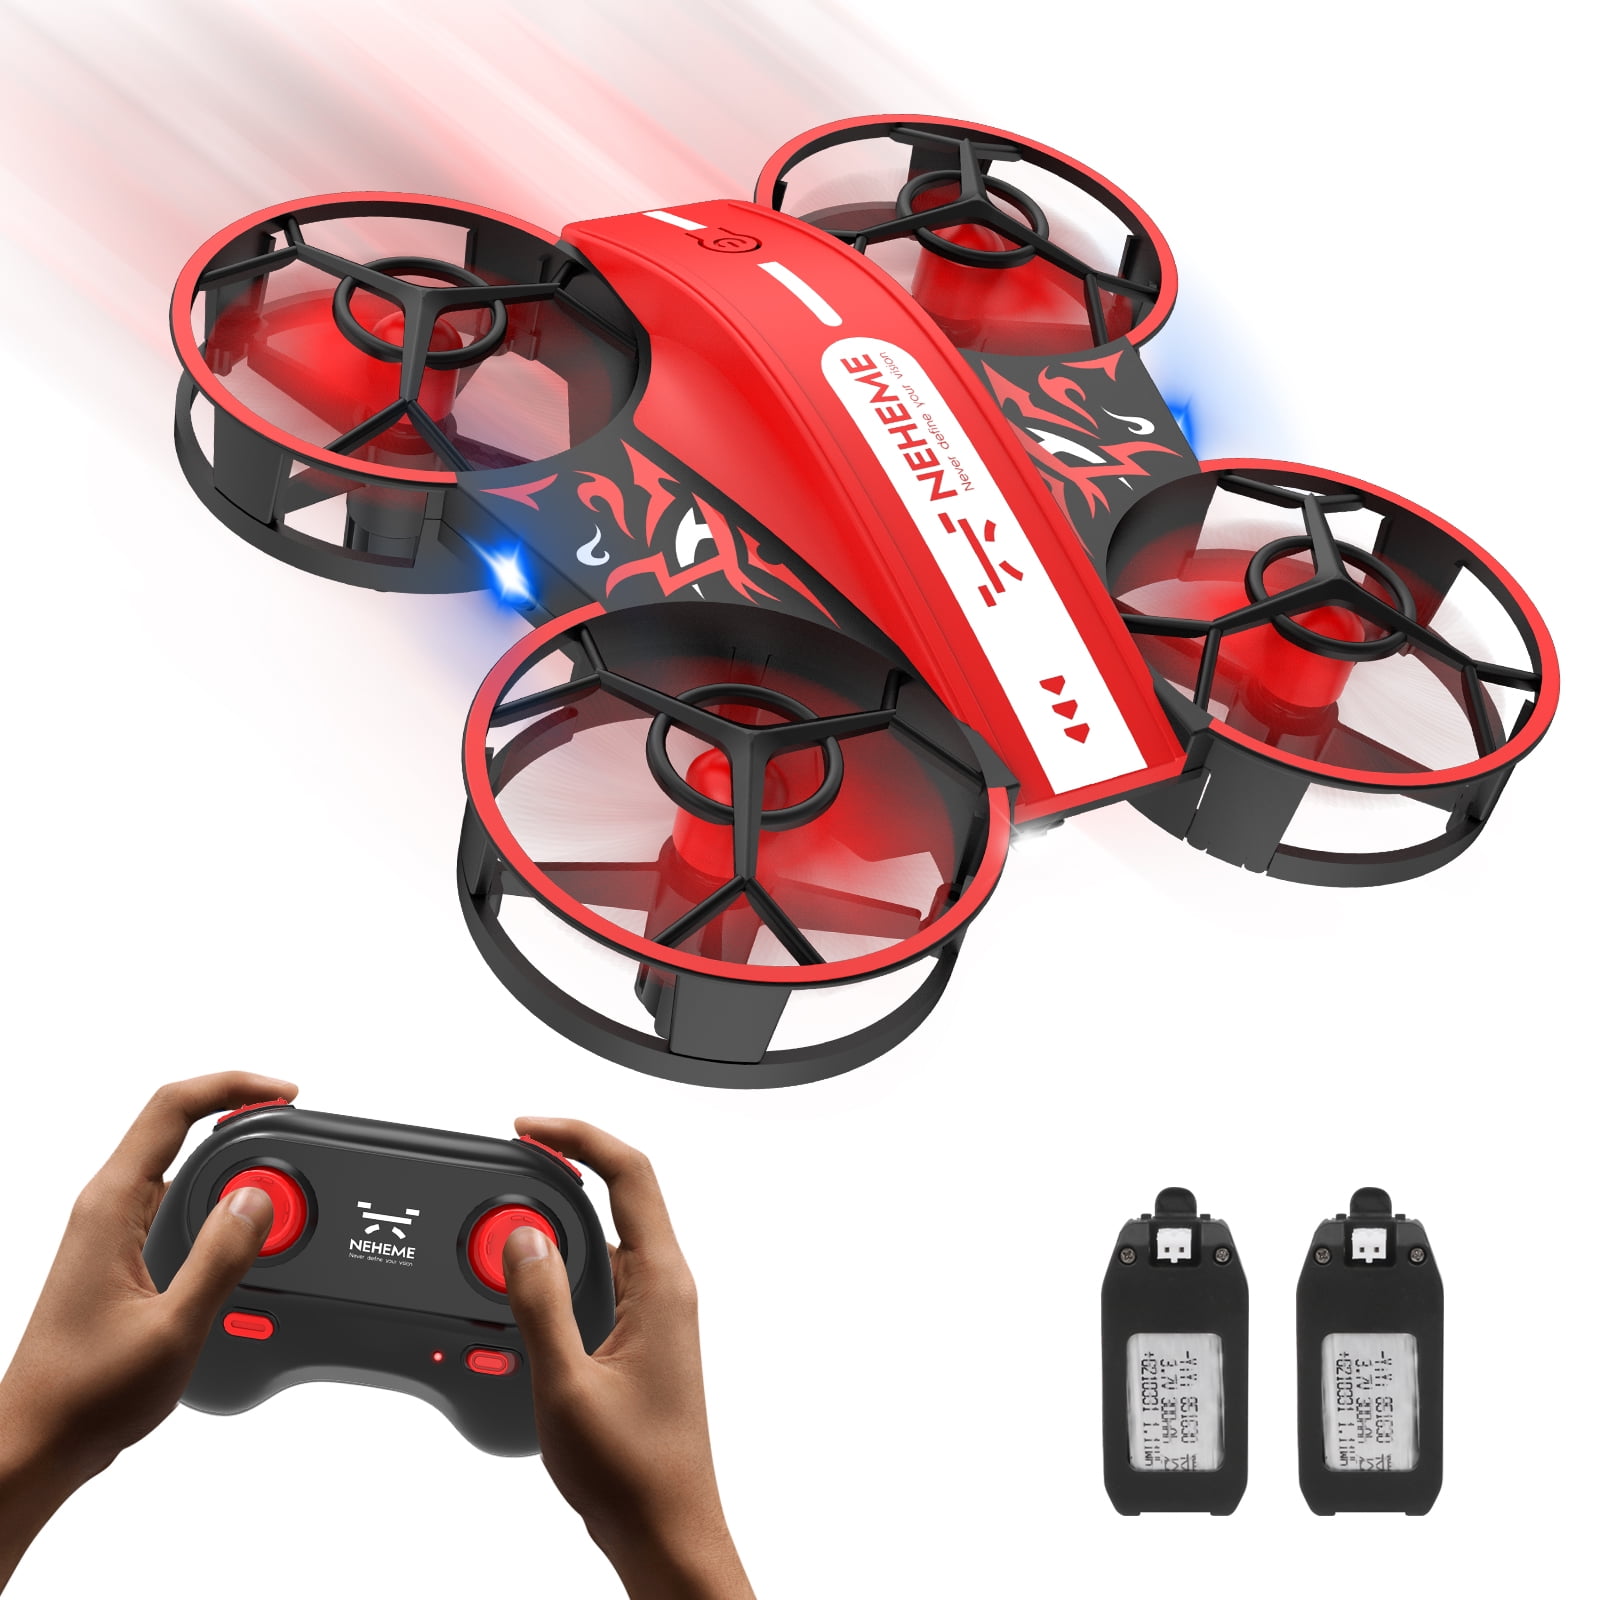 NEHEME NH330 Mini Drones for Kids Beginners Adults, RC Small Helicopter  Quadcopter with Headless Mode, Auto Hovering, Throw to Go, 3D Flip and 2